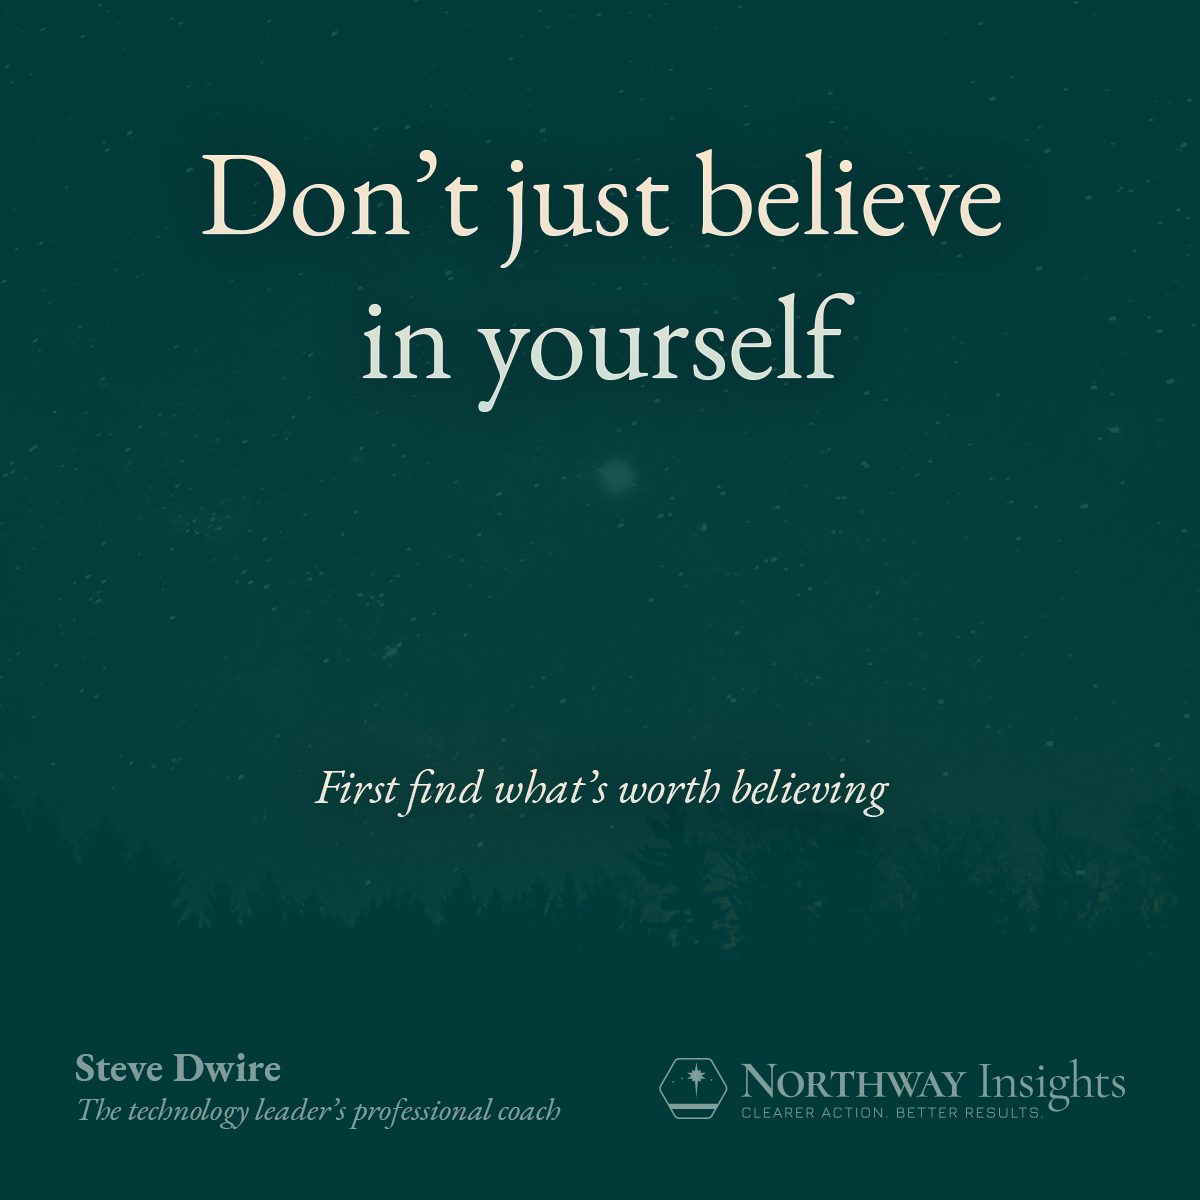 Don't just believe in yourself. First find what's worth believing.